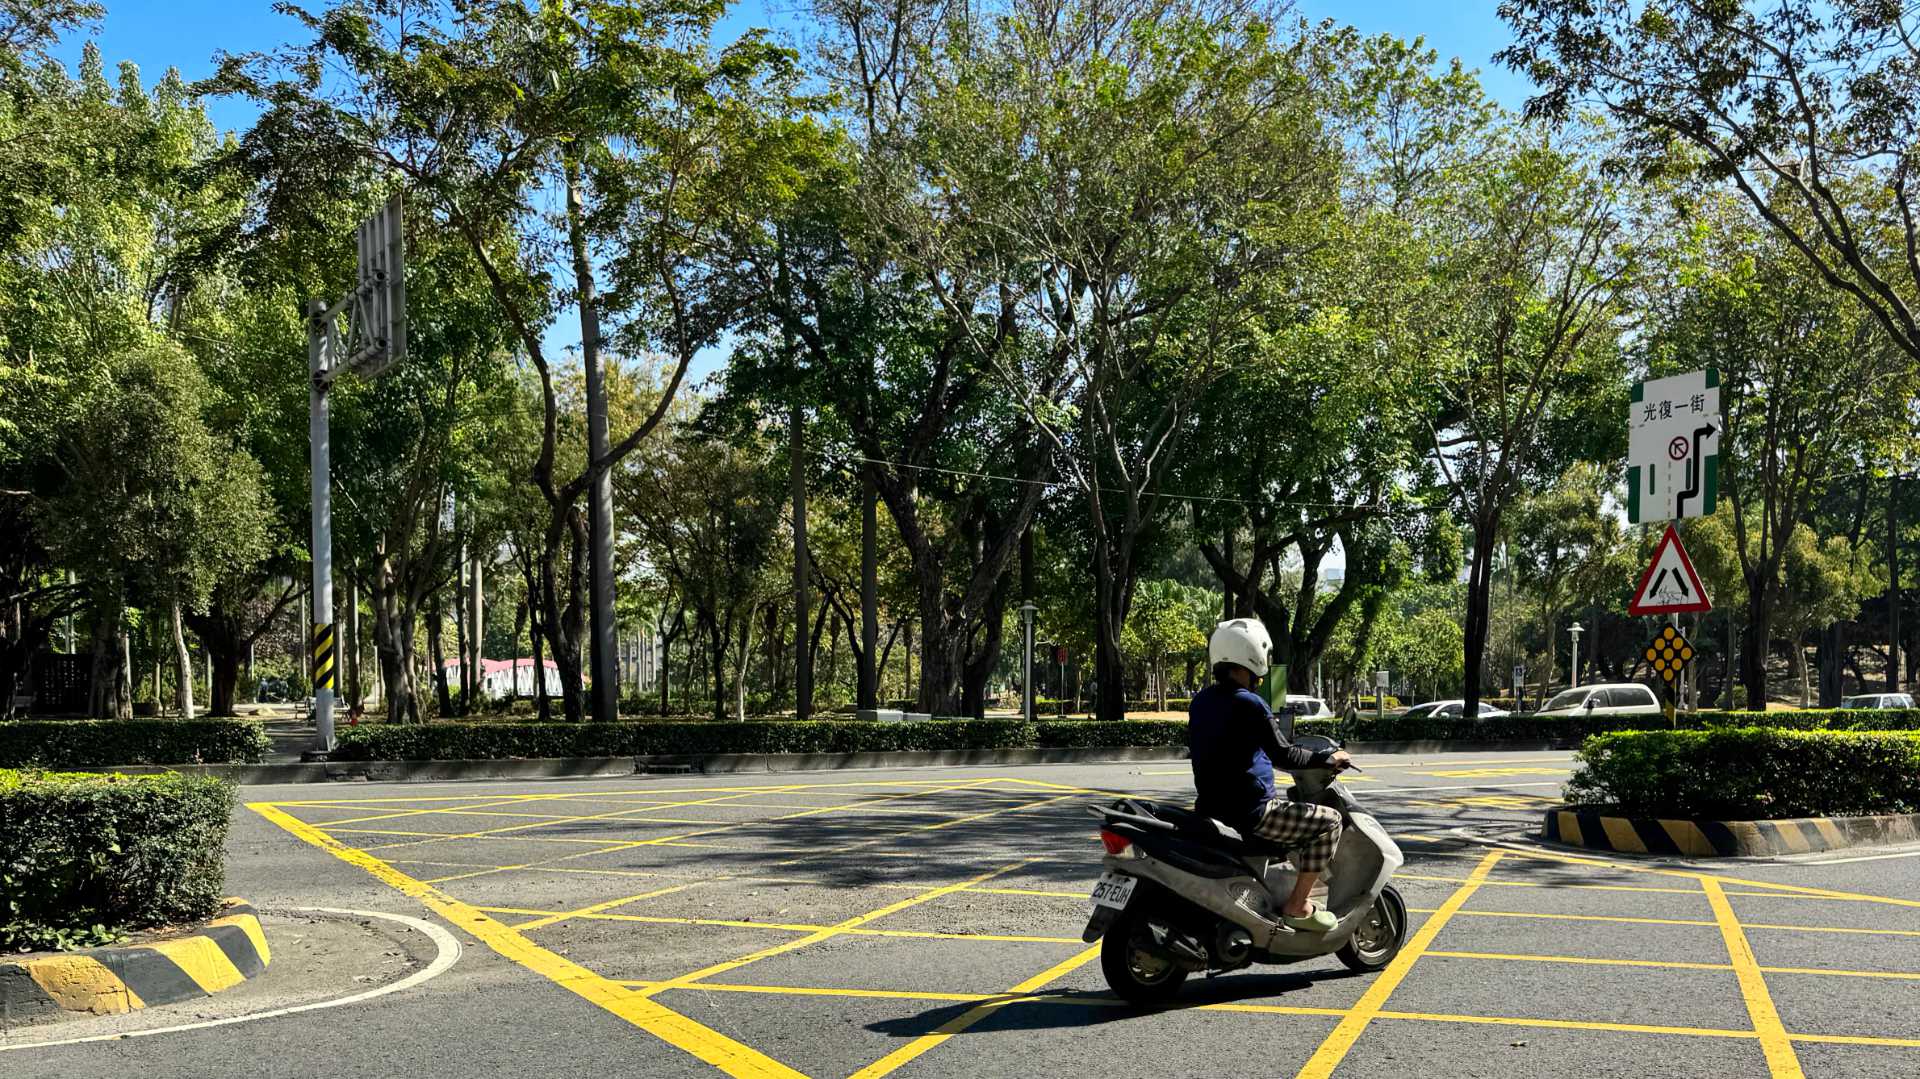 Photo of Central Park taken across a few lanes of traffic. A scooter is driving by in the foreground. The park comprises many tall trees with an arched footbridge in the distance.